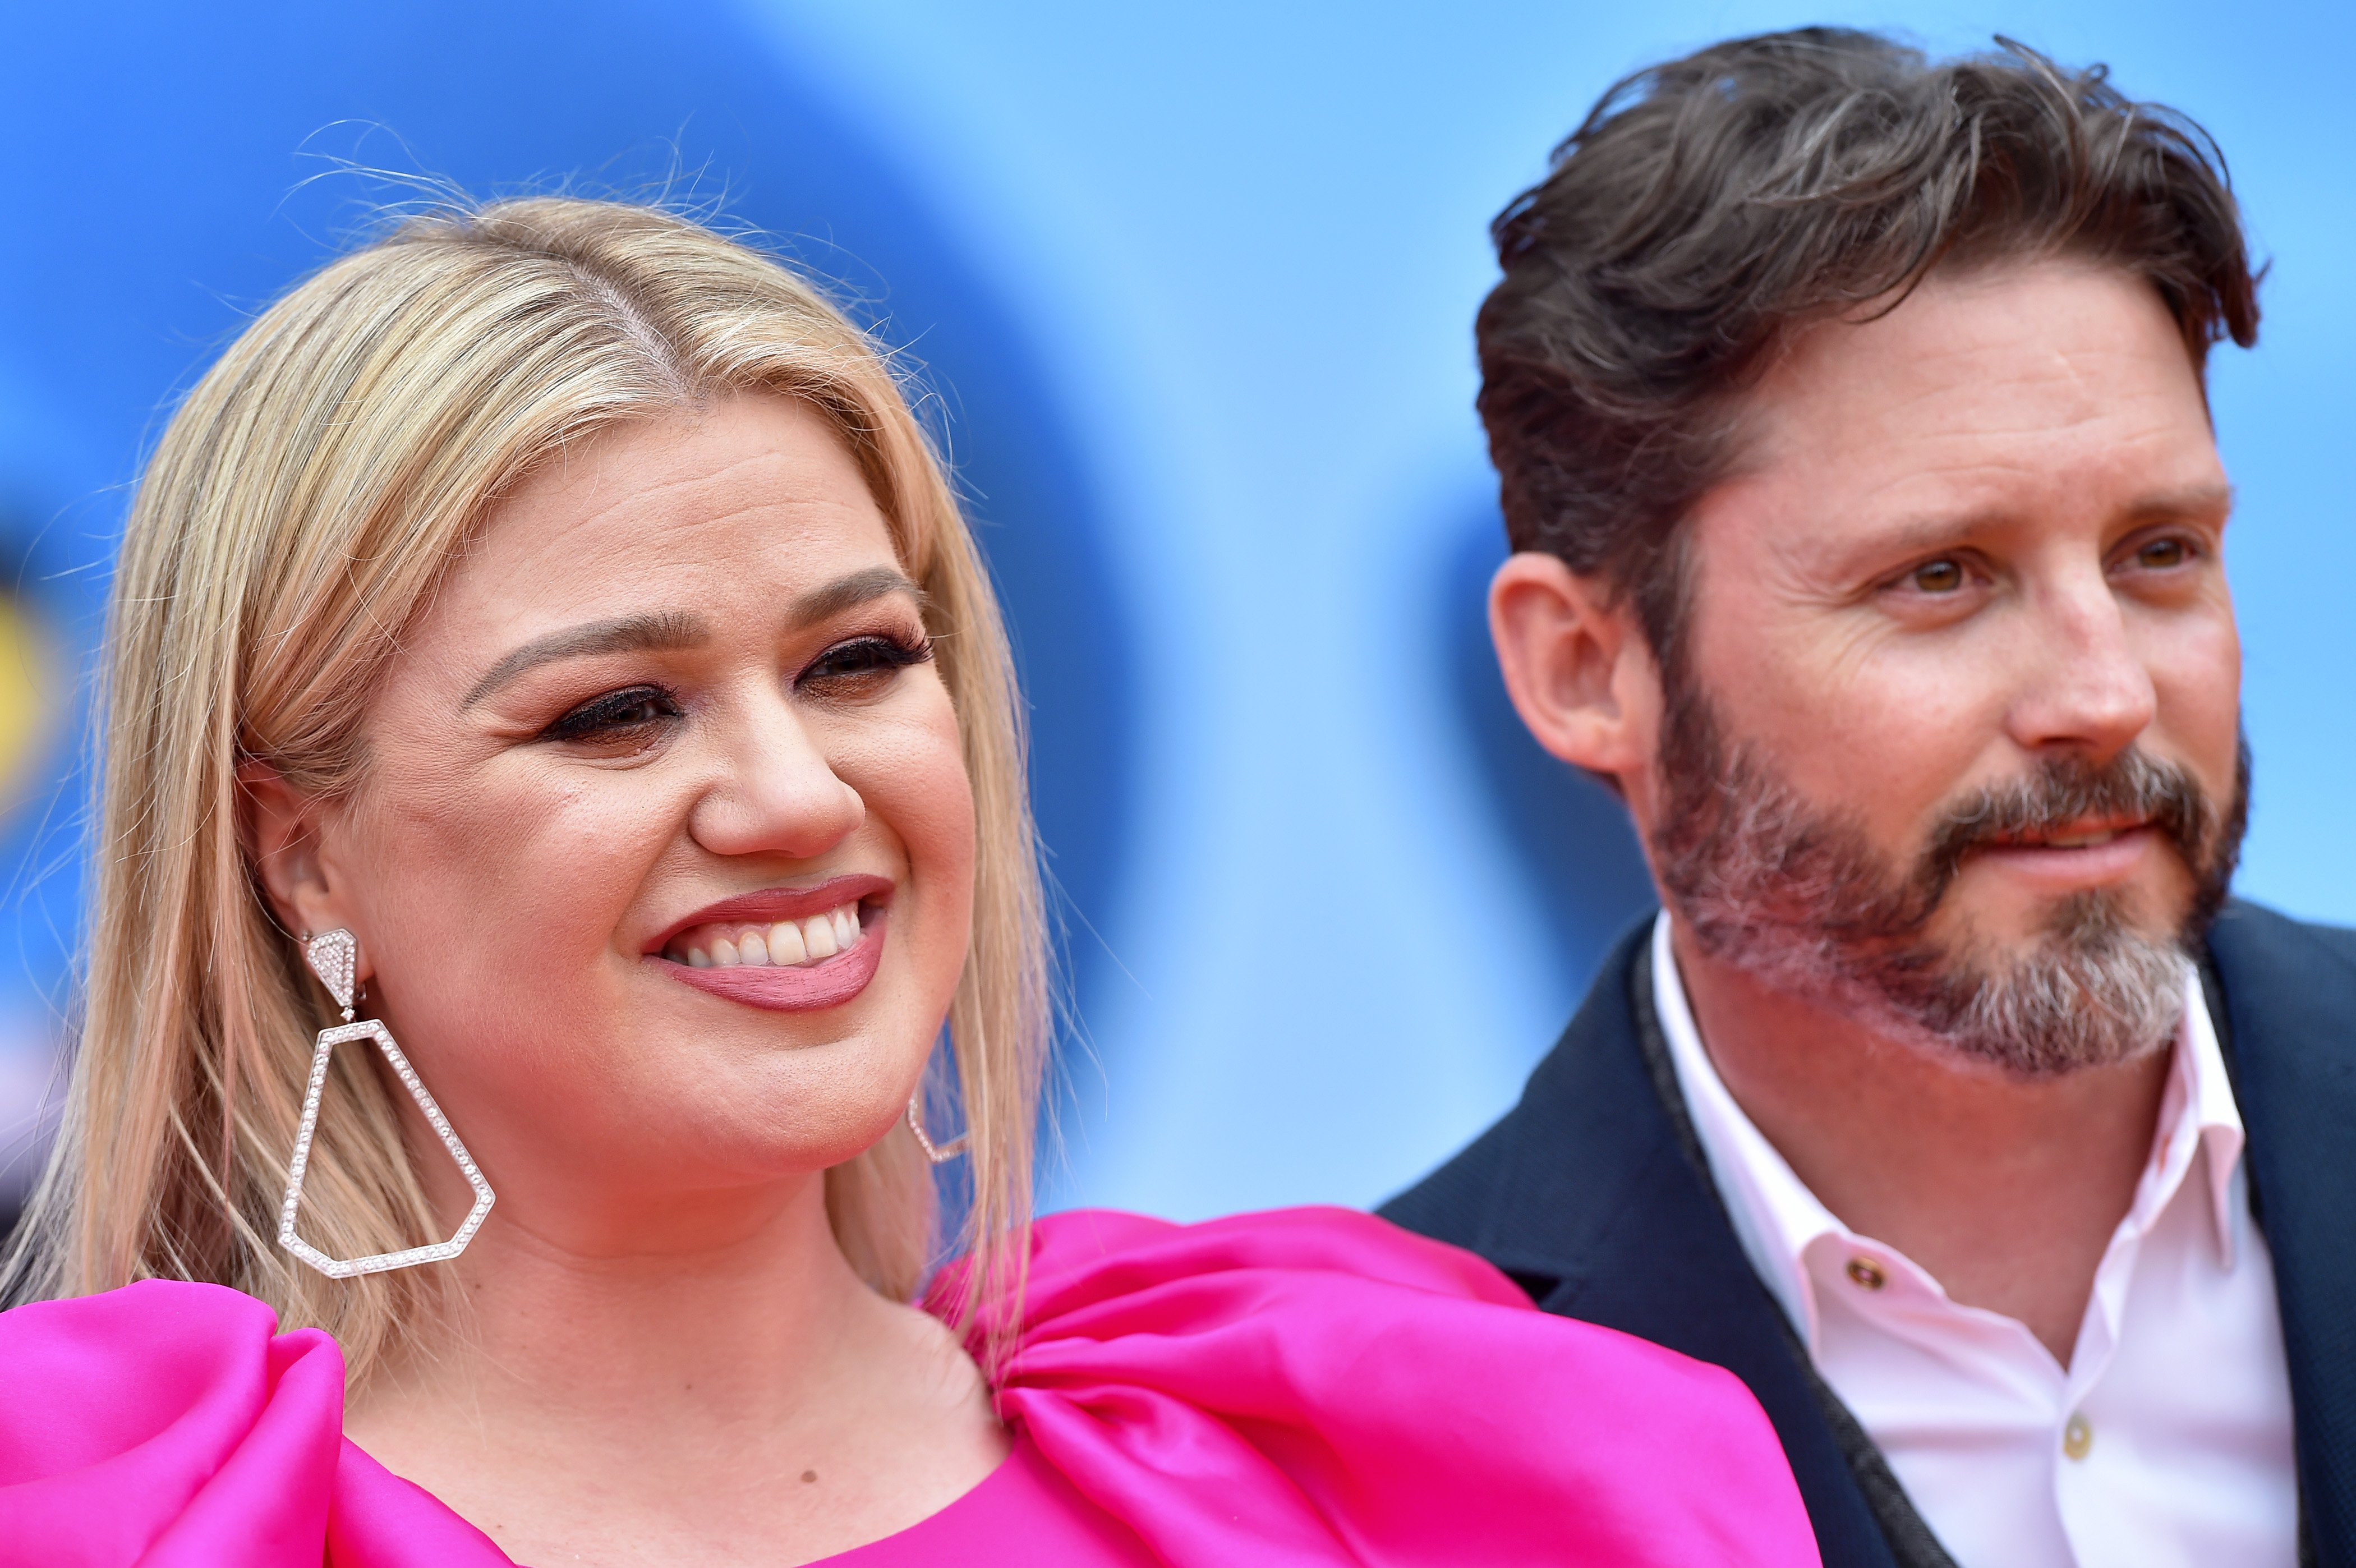 Kelly Clarkson and her husband Brandon Blackstock attend STX Films World Premiere of "UglyDolls" at Regal Cinemas L.A. Live on April 27, 2019 in Los Angeles, California. | Source: Getty Images